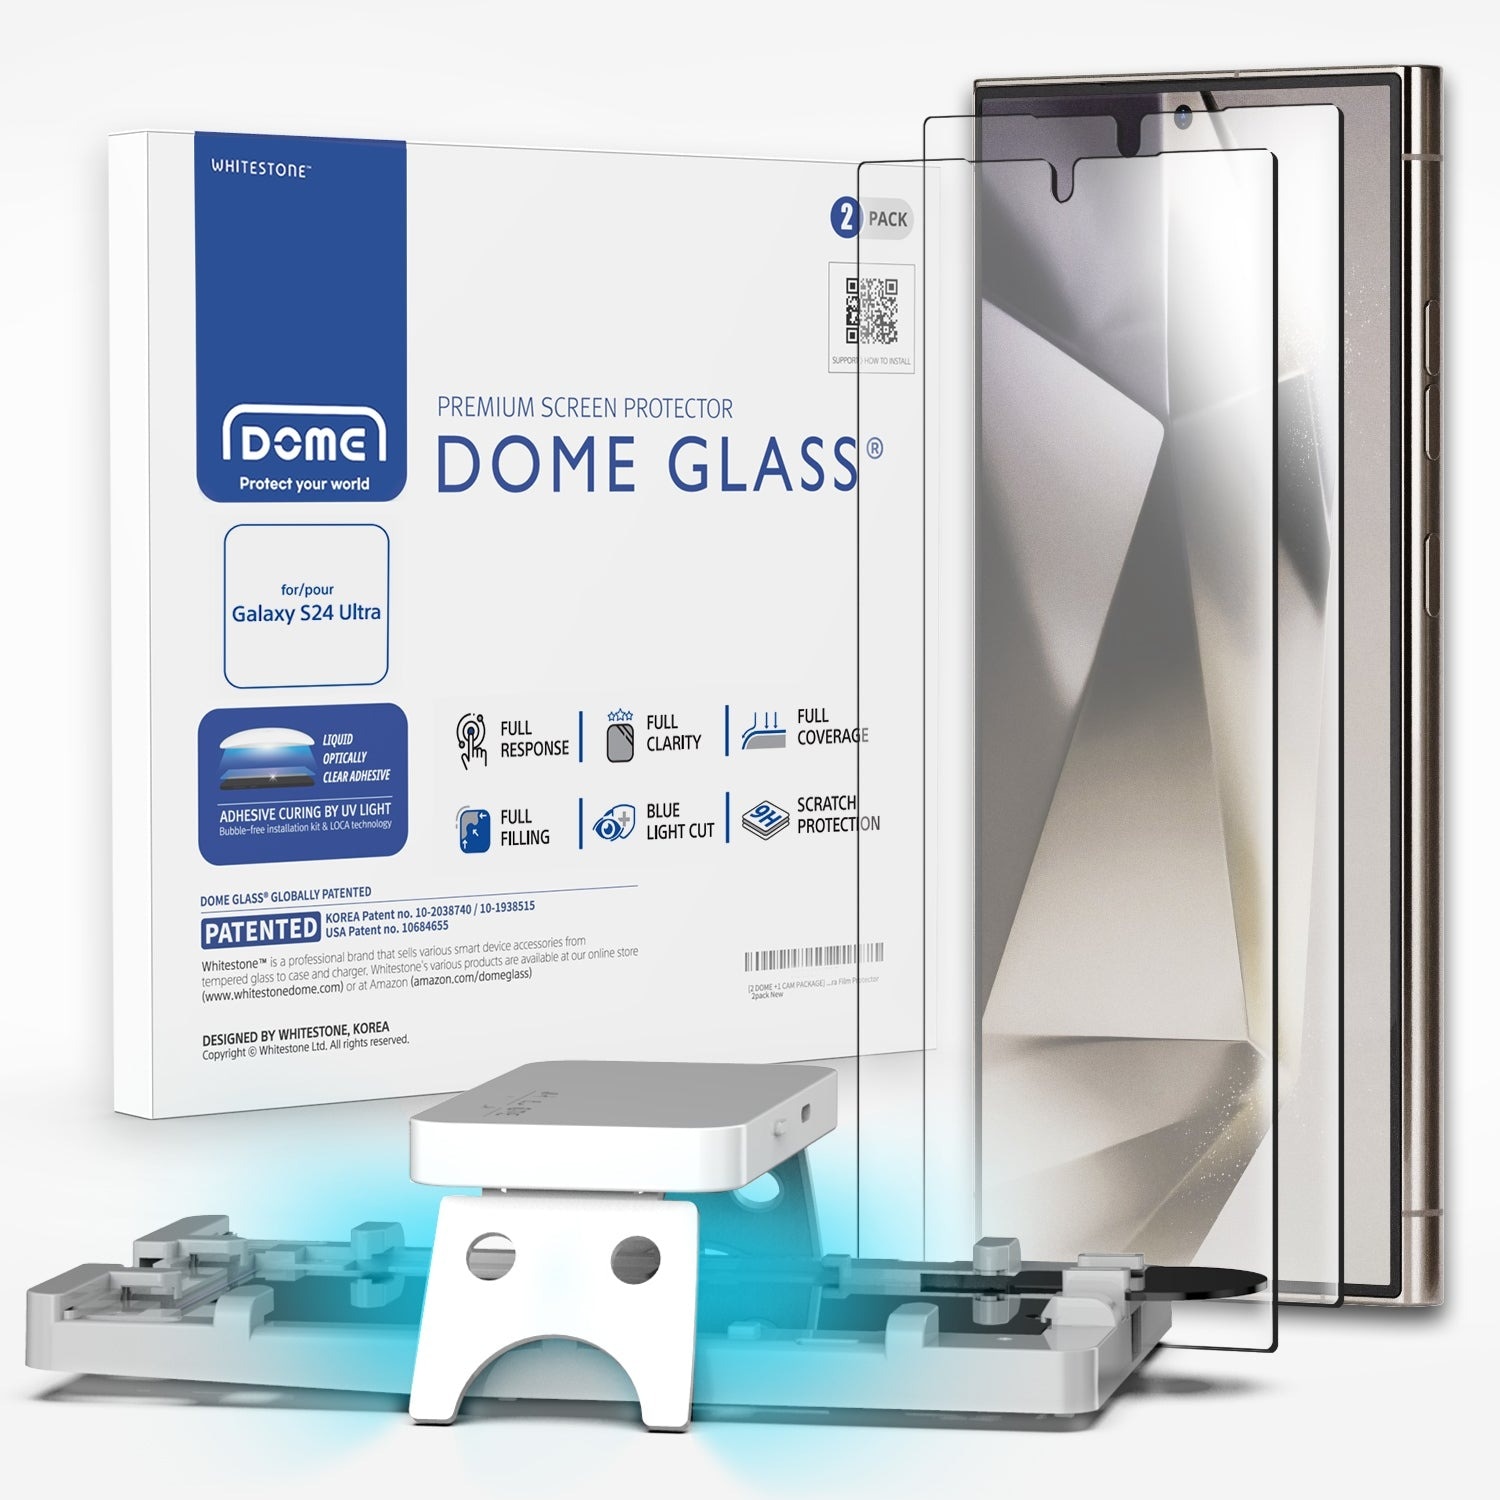 Samsung Galaxy S24 Ultra Dome Glass Screen Protector (2-pack)